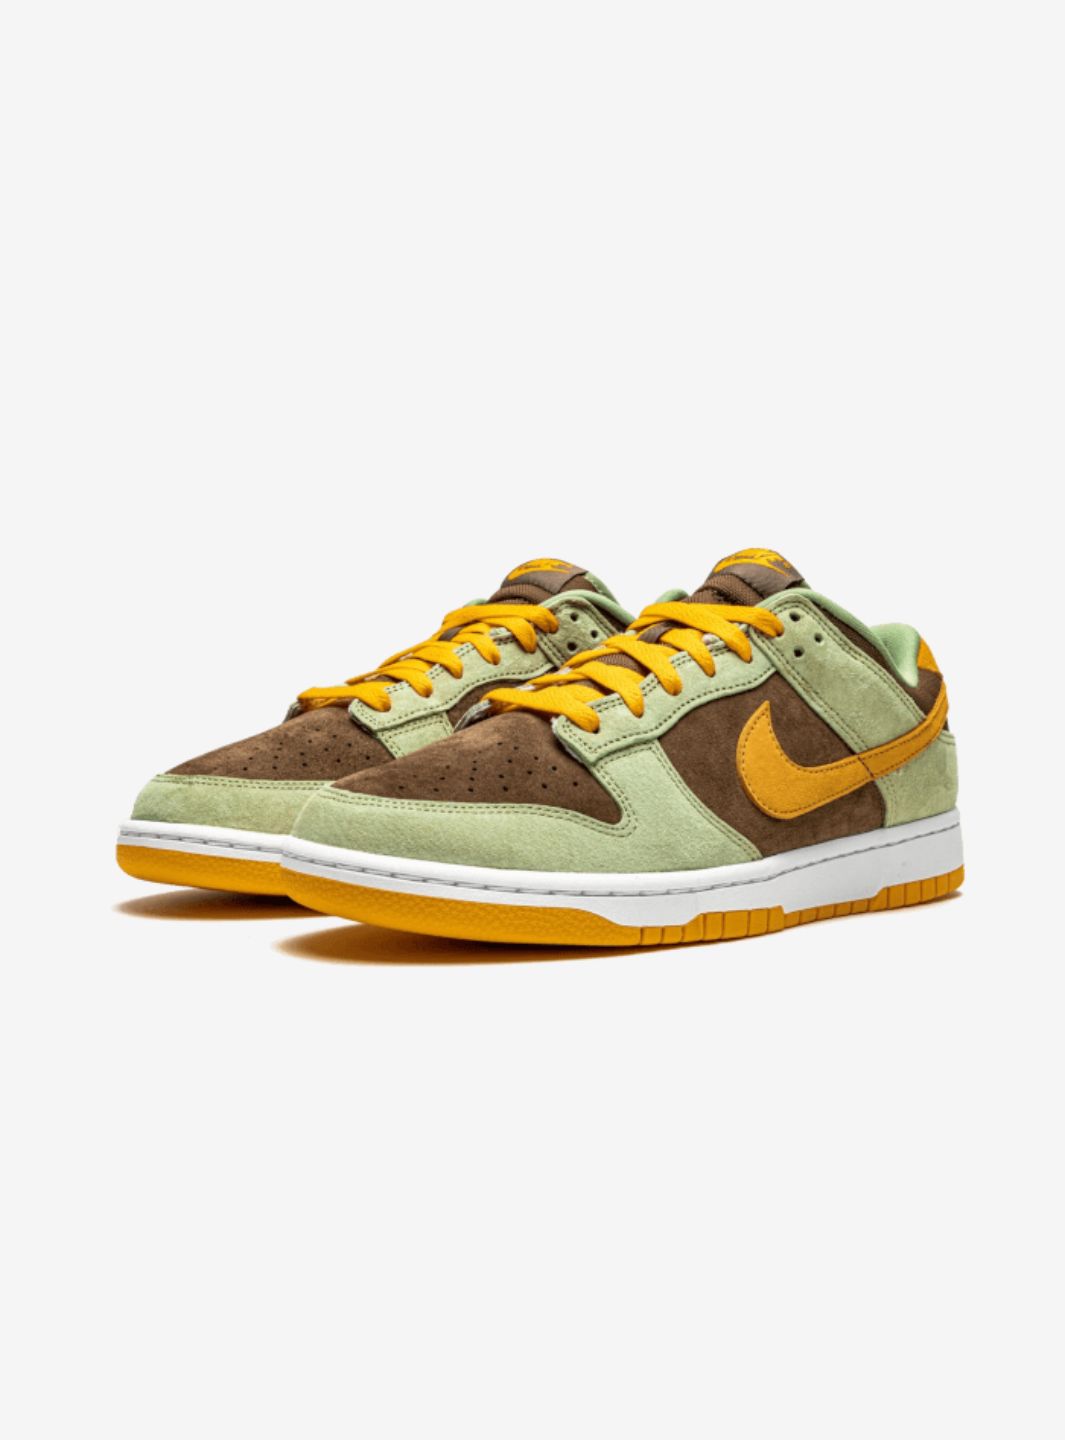 Nike Dunk Low Dusty Olive - DH5360-300 | ResellZone